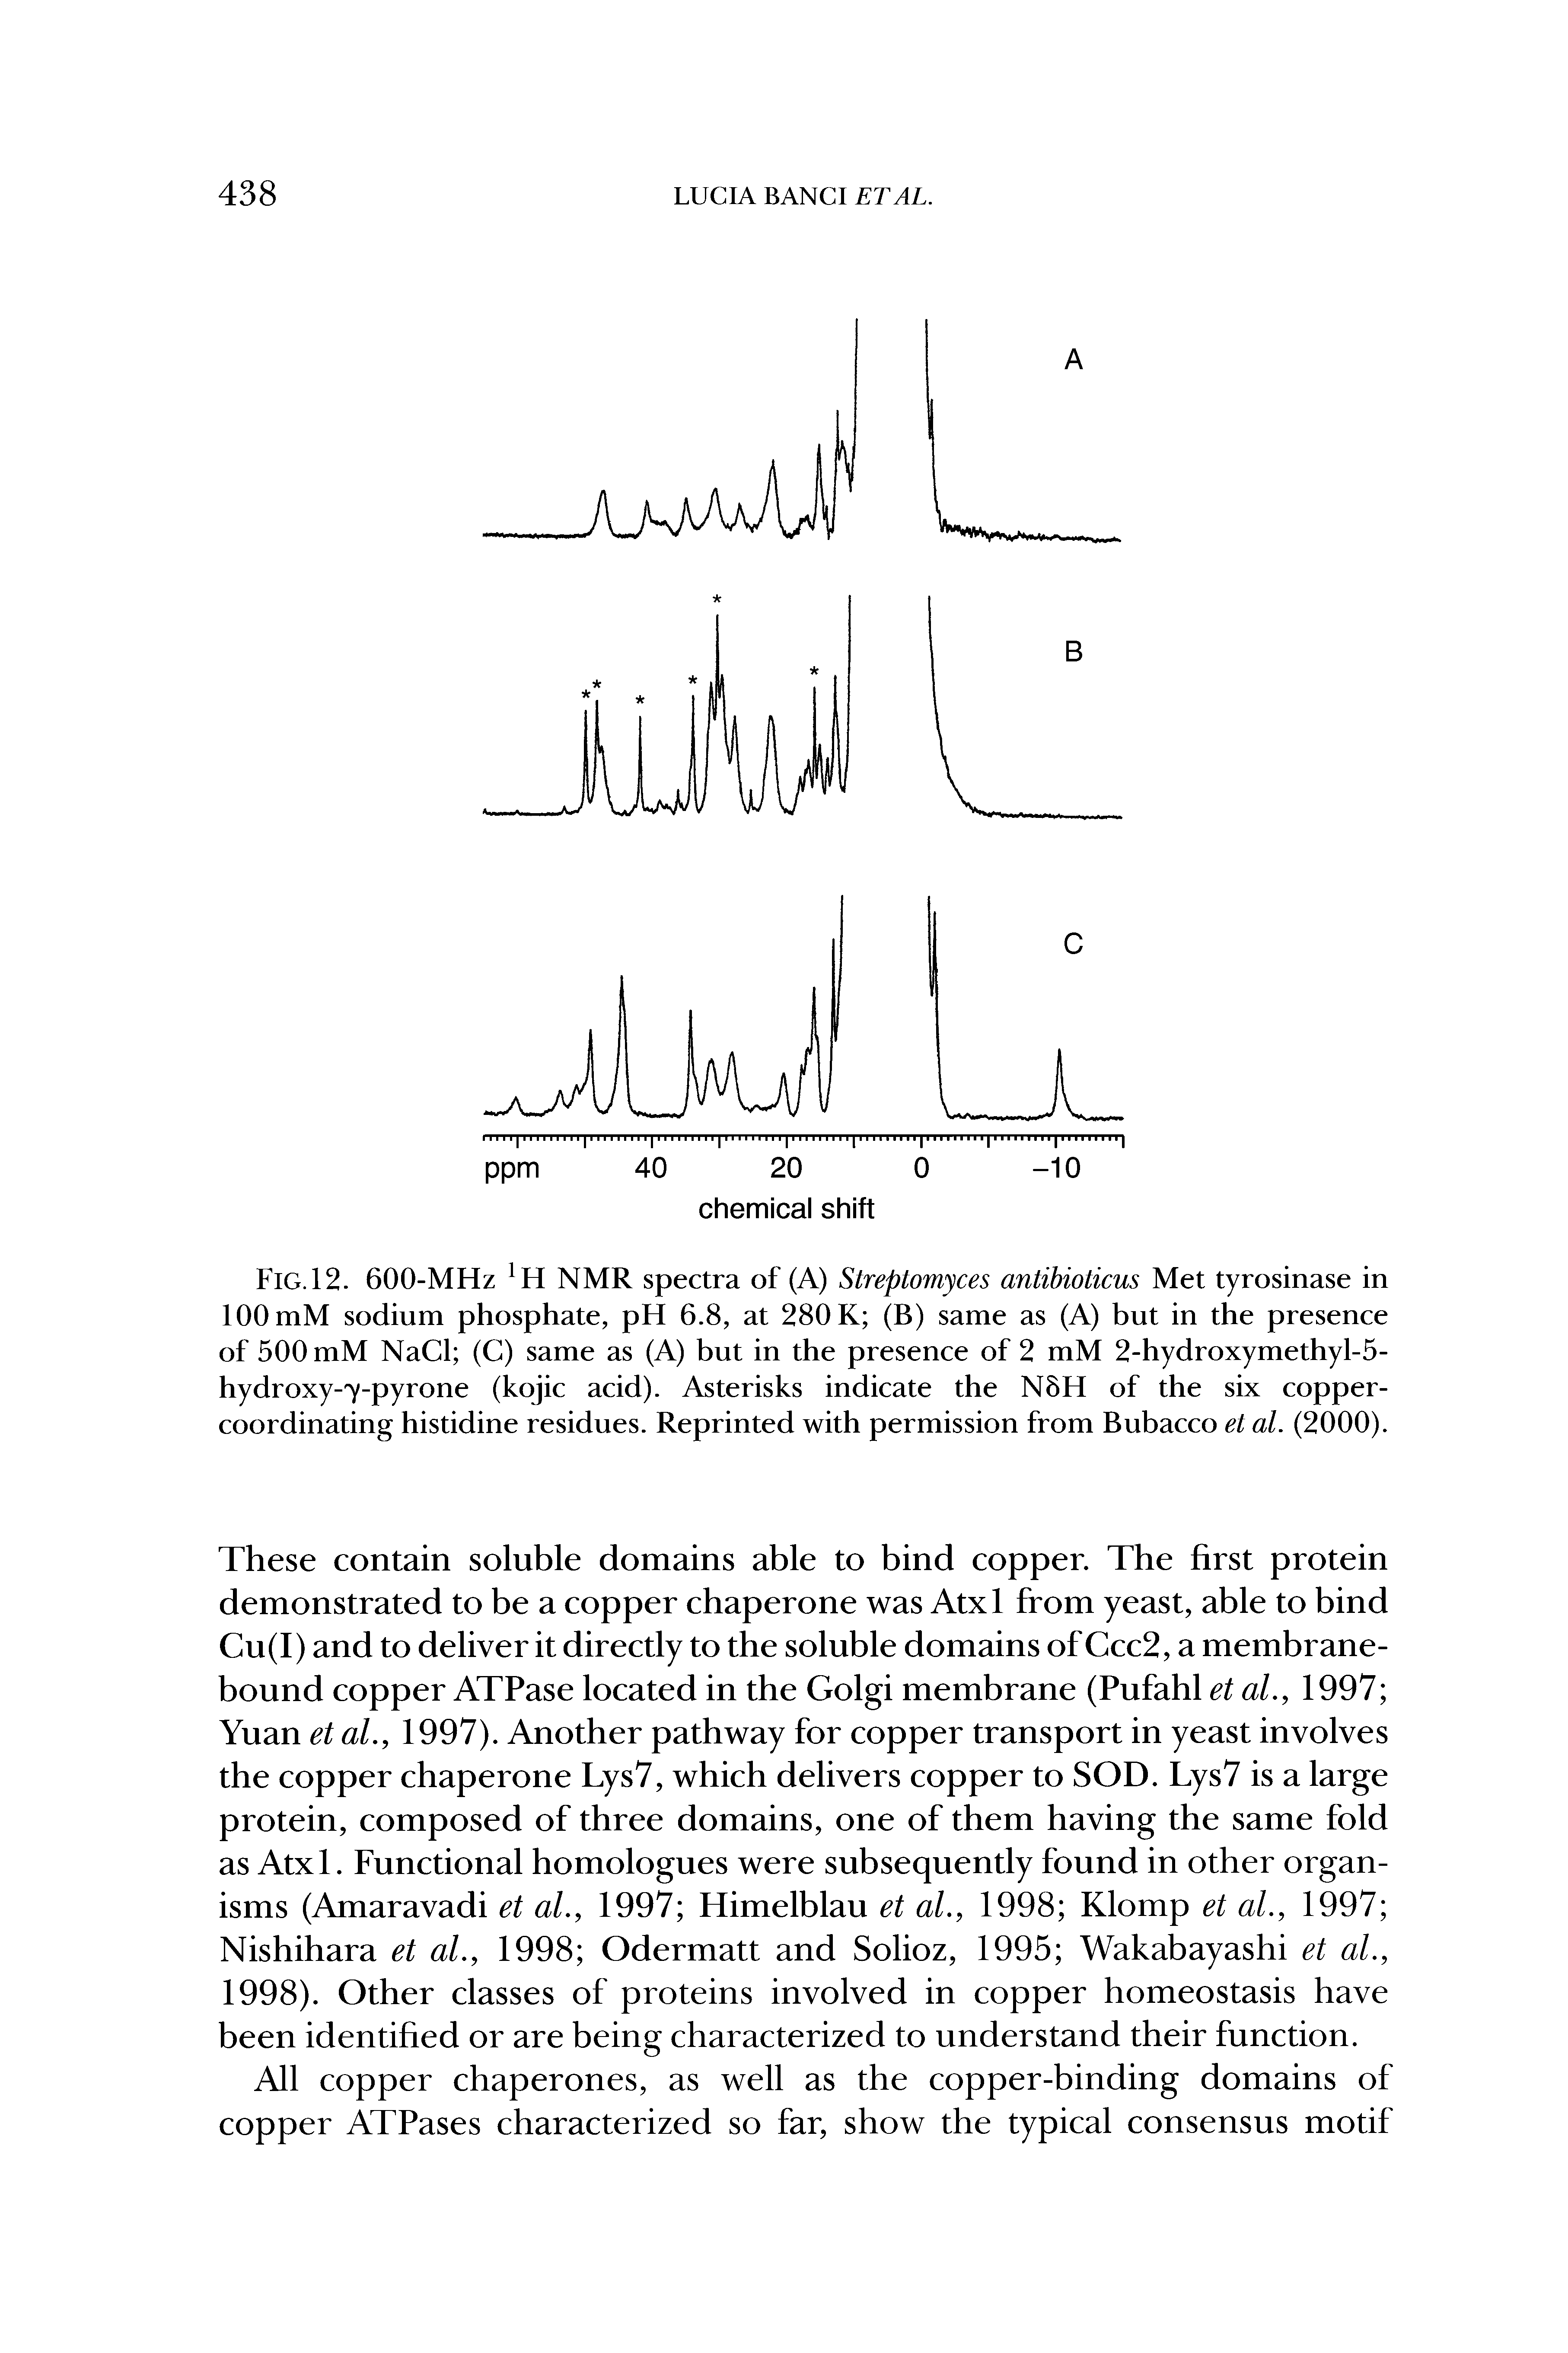 Fig. 12. 600-MHz NMR spectra of (A) Streptomyces antibioticus Met tyrosinase in 100 mM sodium phosphate, pH 6.8, at 280 K (B) same as (A) but in the presence of 500 mM NaCl (C) same as (A) but in the presence of 2 mM 2-hydroxymethyl-5-hydroxy-y-pyrone (kojic acid). Asterisks indicate the N8H of the six coppercoordinating histidine residues. Reprinted with permission from Bubacco et al. (2000).